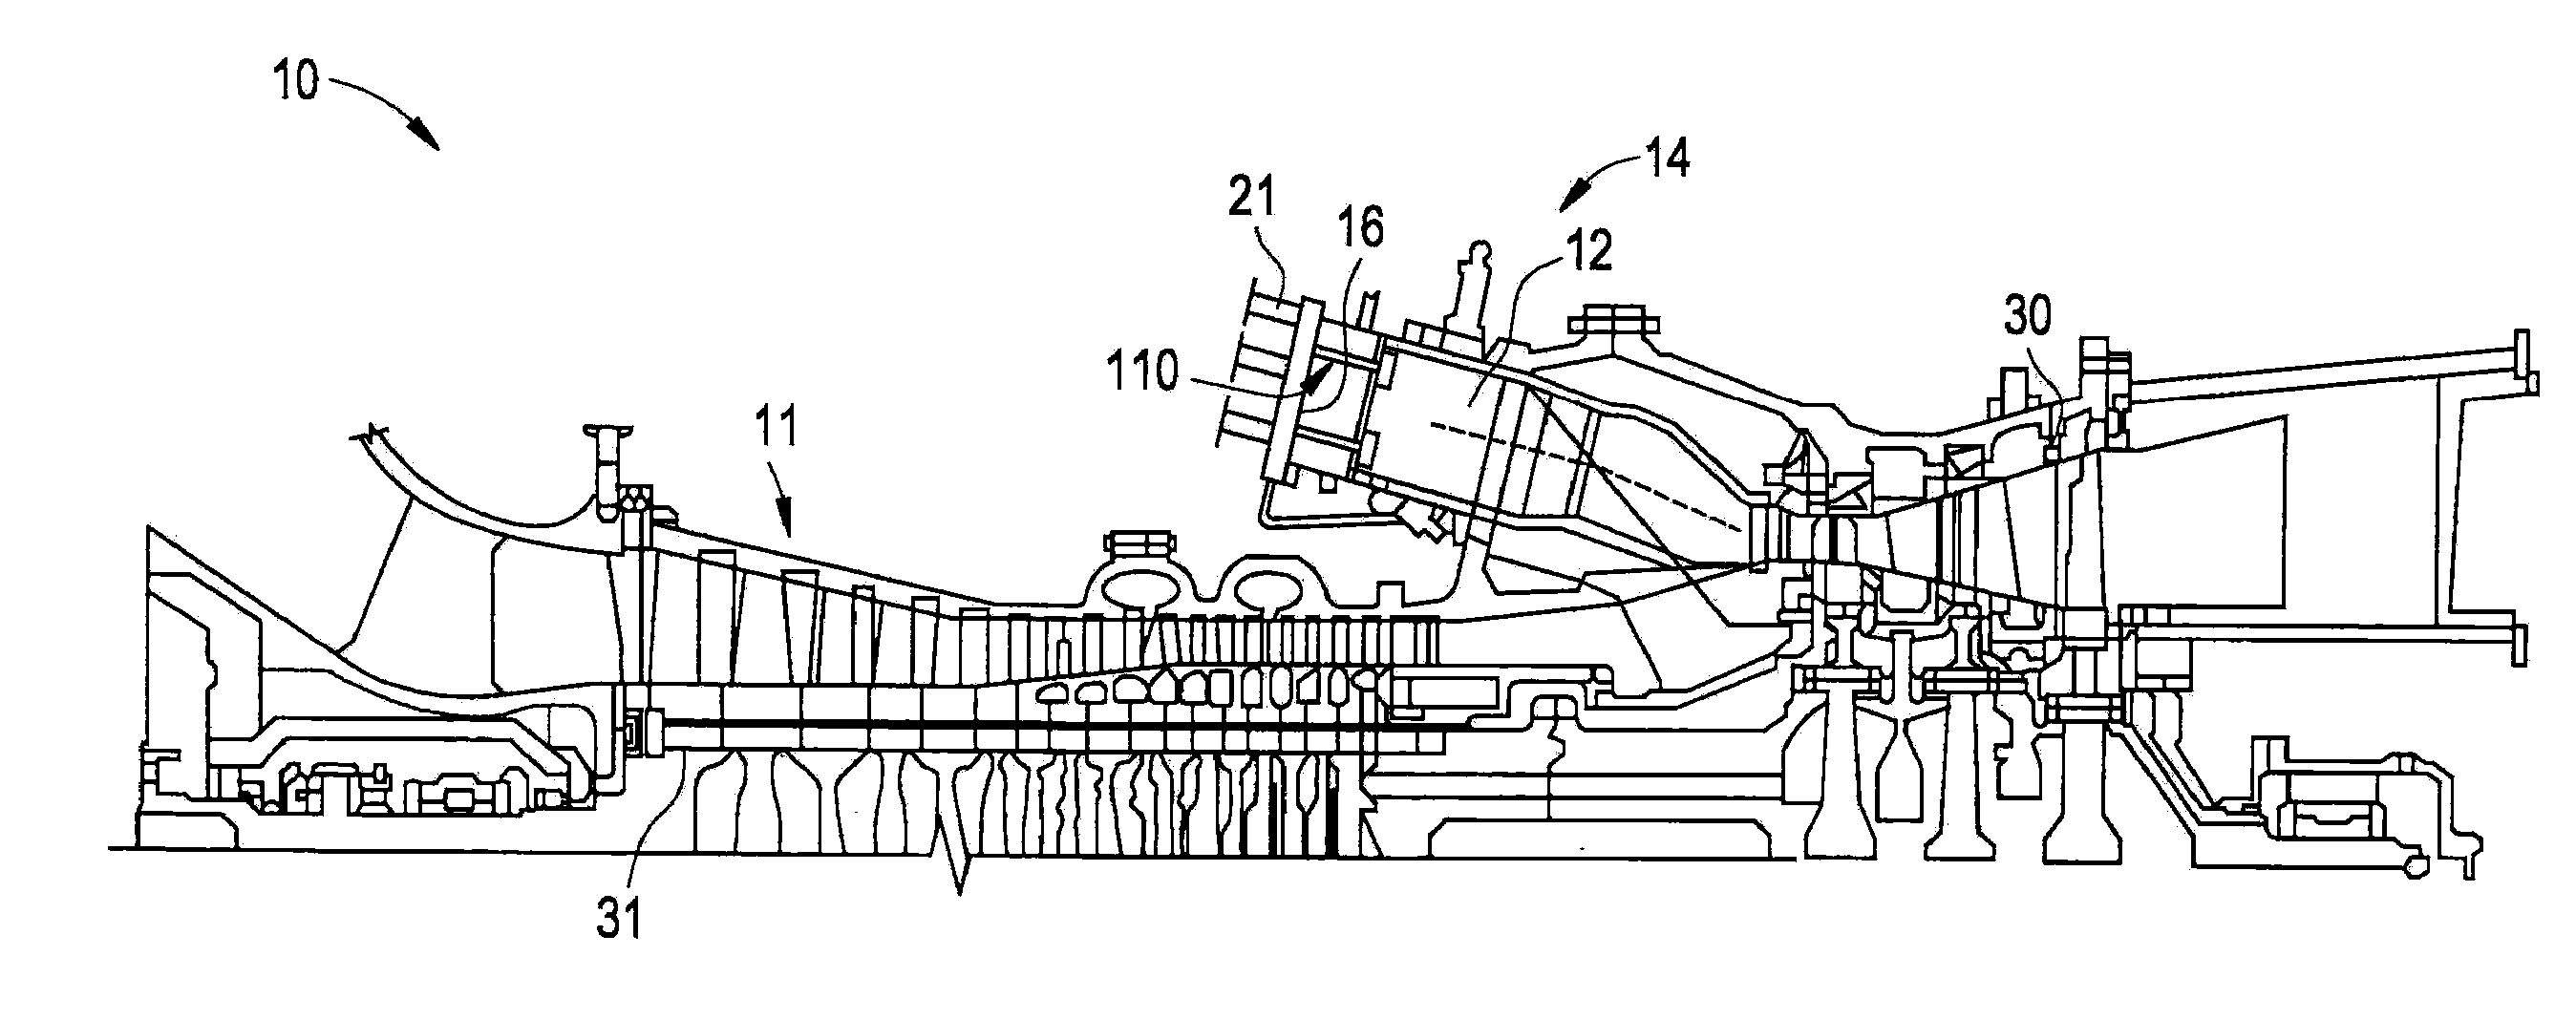 Premixed direct injection nozzle